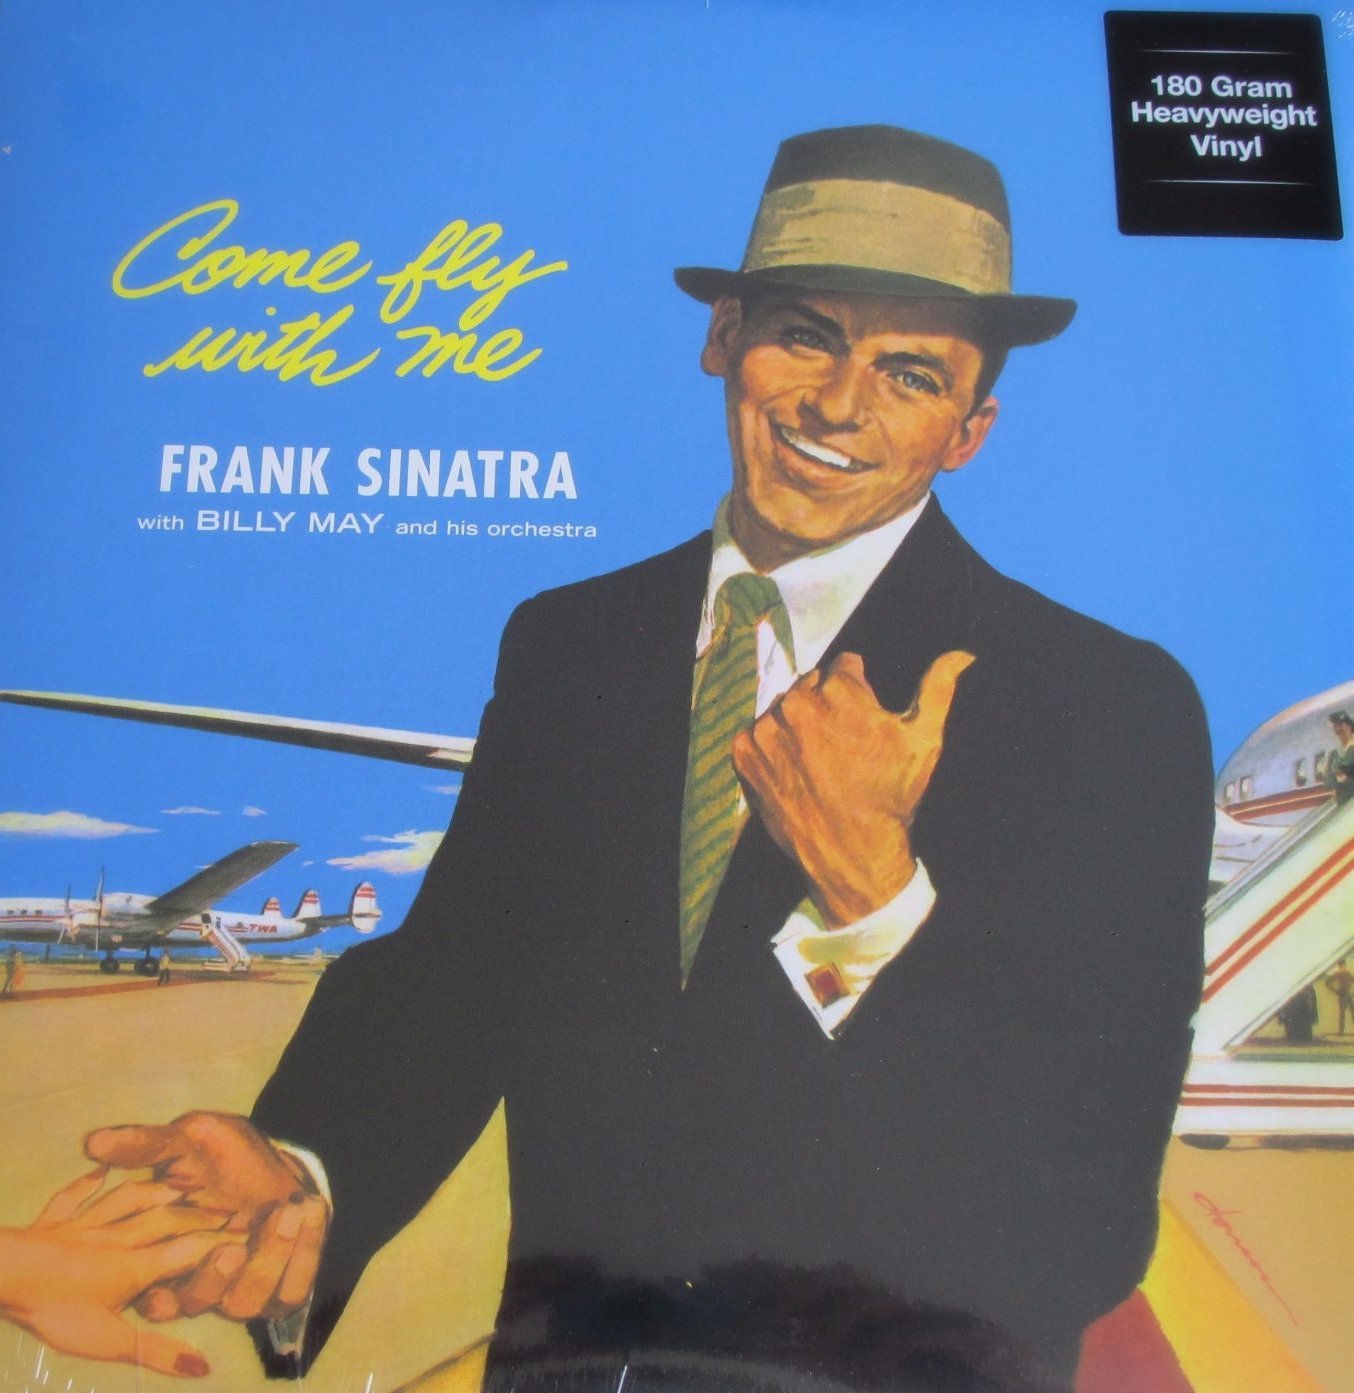 Frank Sinatra Come Fly With Me 180 Gram Heavyweight Vinyl Record